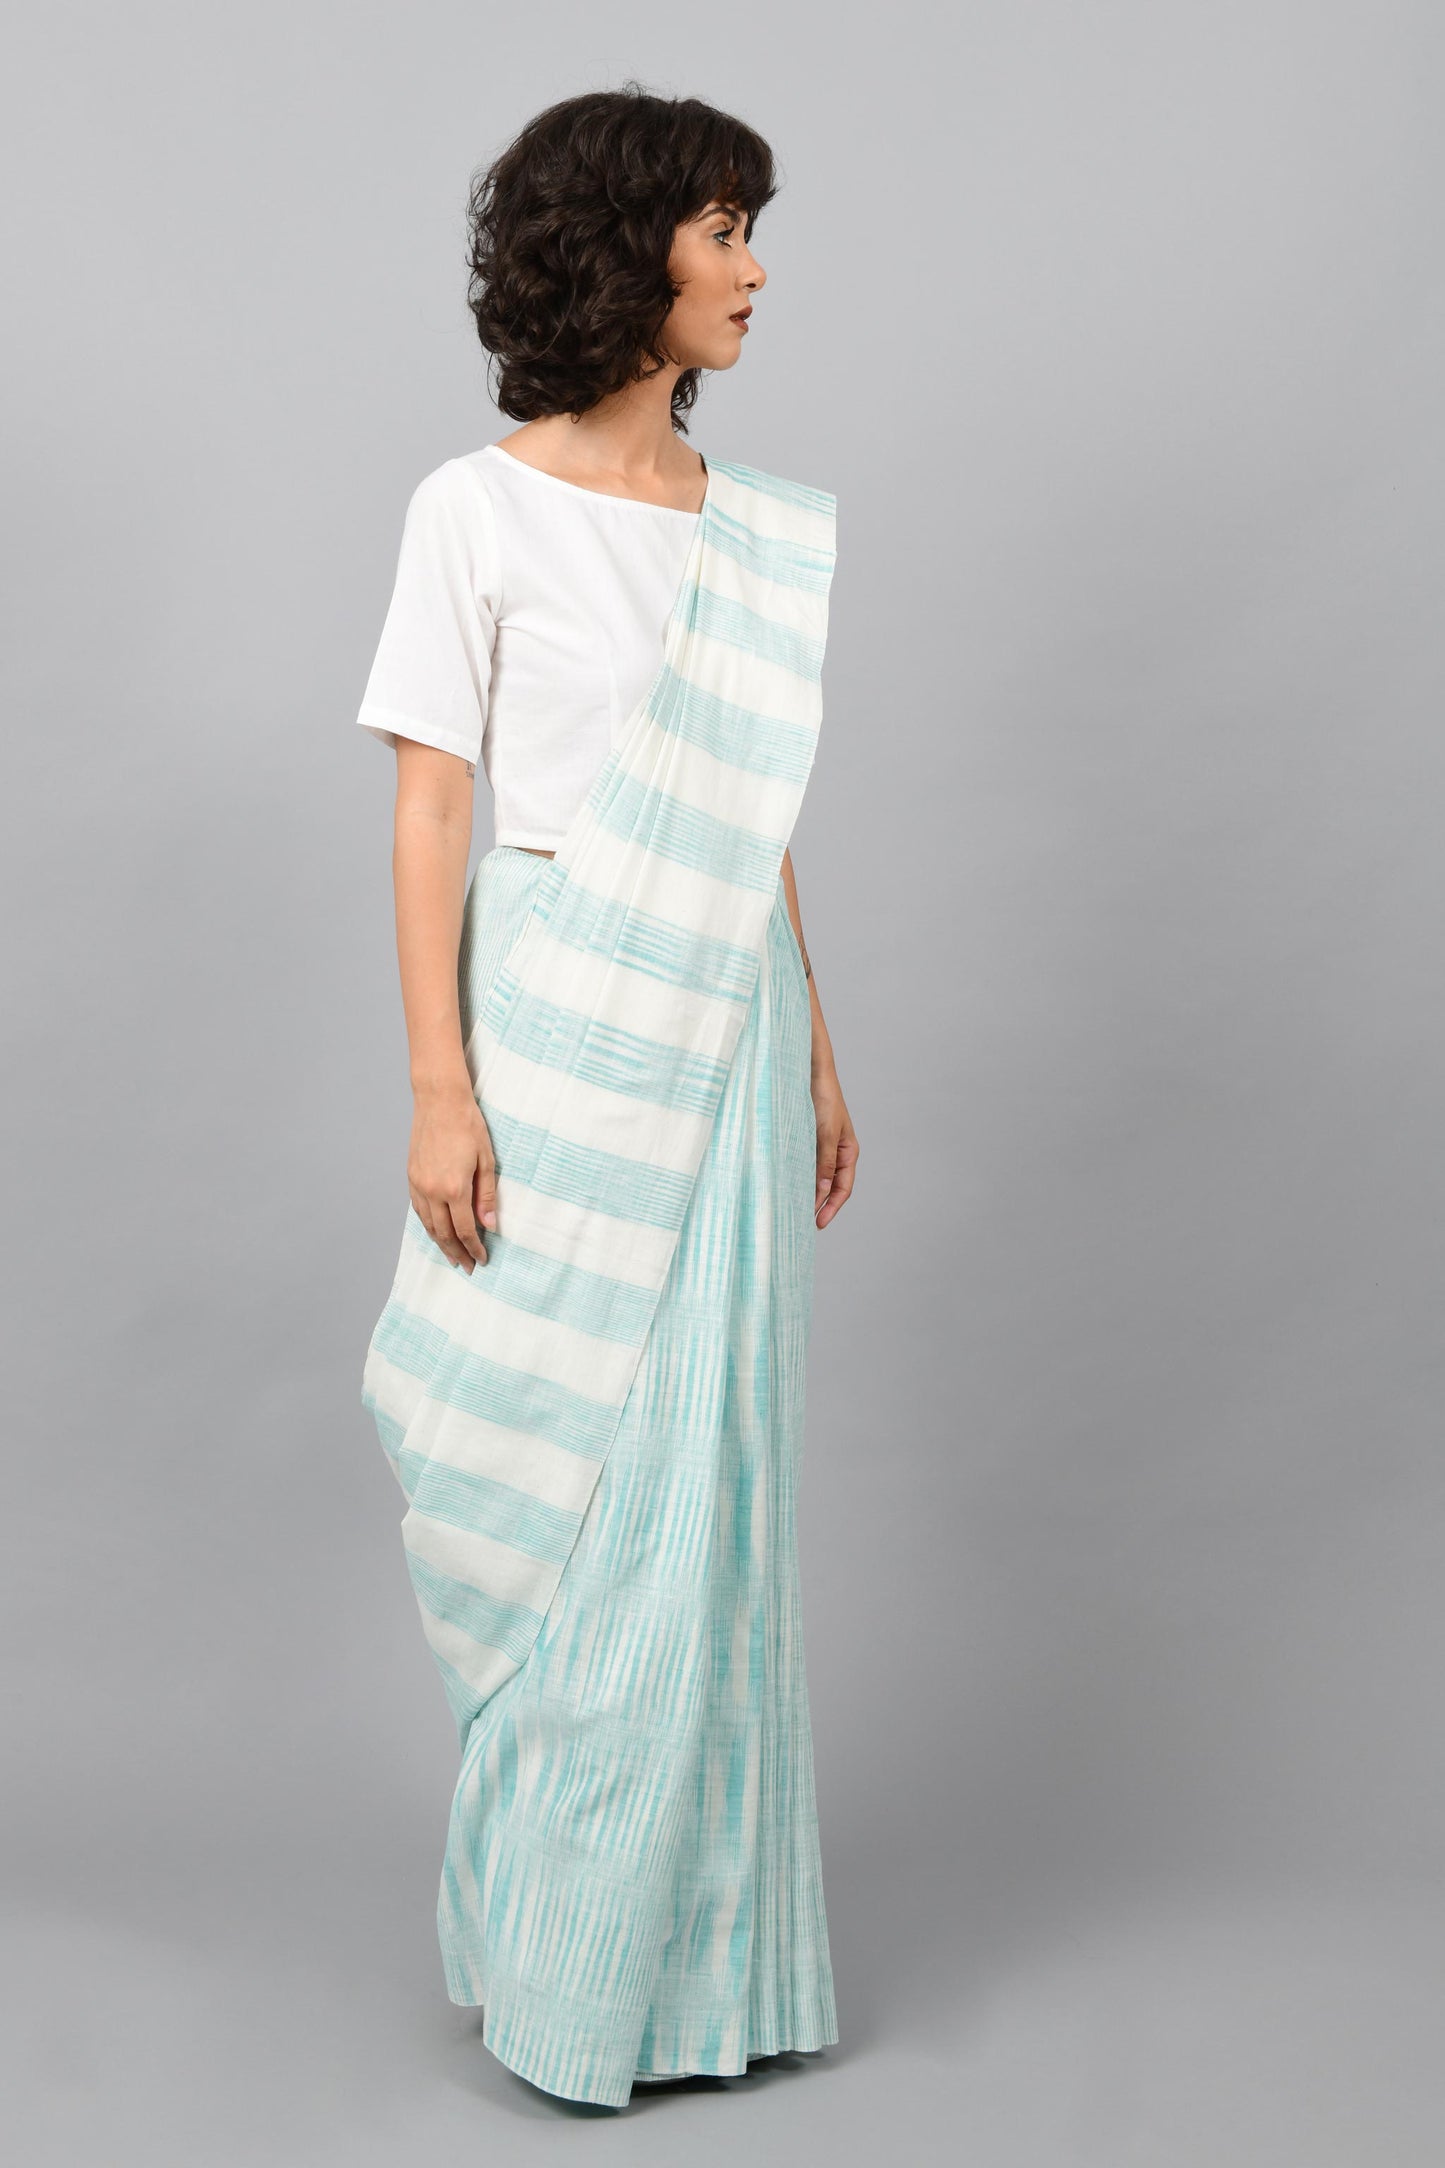 Side pose of a female womenswear fashion model draped in a aquamarine blue & white space dyed homespun and handwoven cotton sari by Cotton Rack.